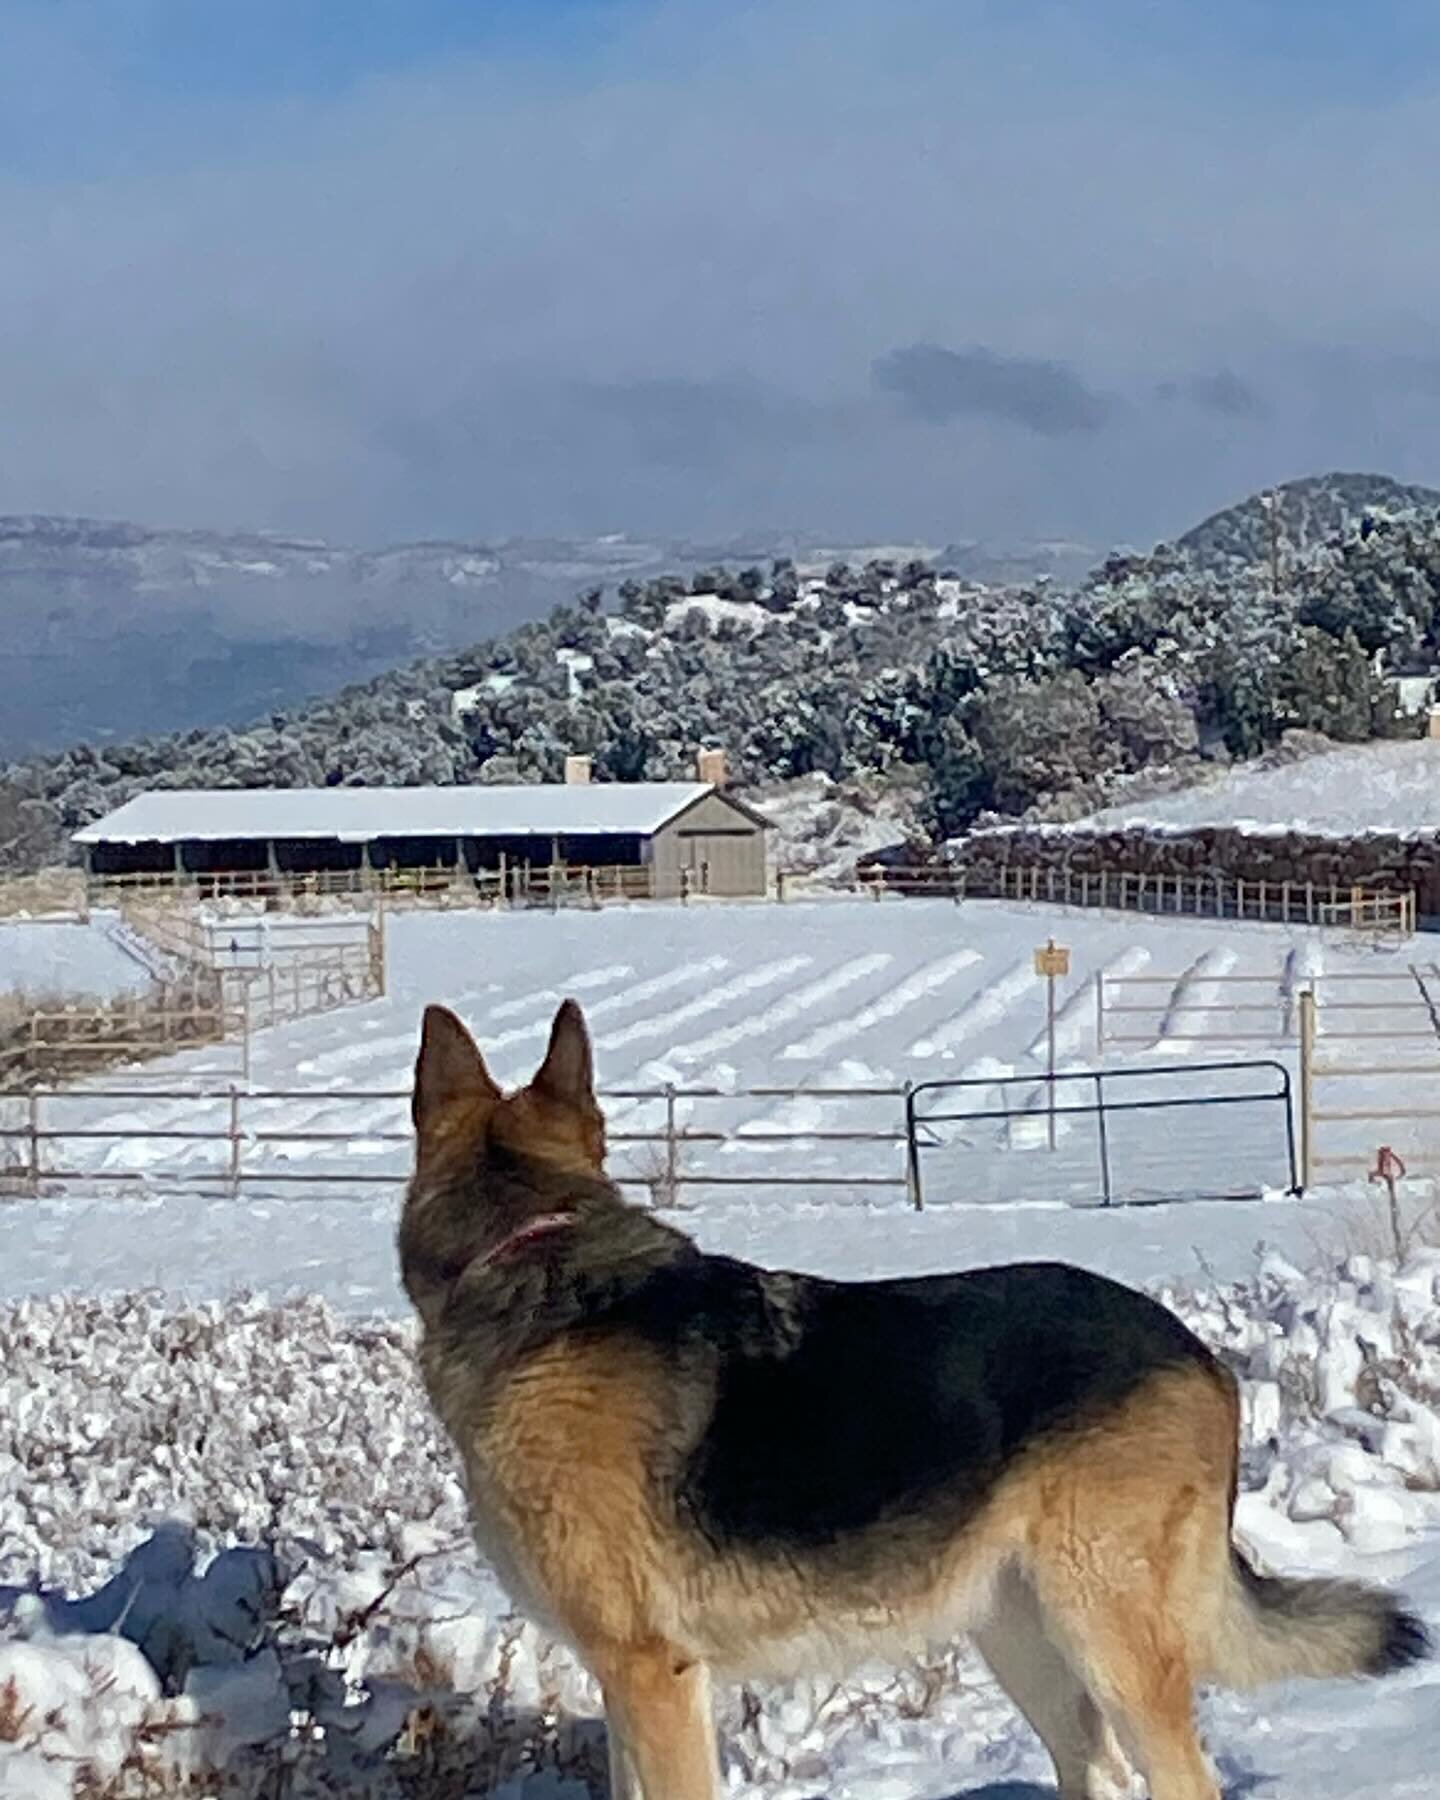 Frost blankets are on and Leia, our German Shepherd, scouts the fields this beautiful, snowy morning. A perfect day to embrace the beginning of the Christmas season and visit the Christmas Boutique in Howard, CO. Local, artisan gifts with complimenta